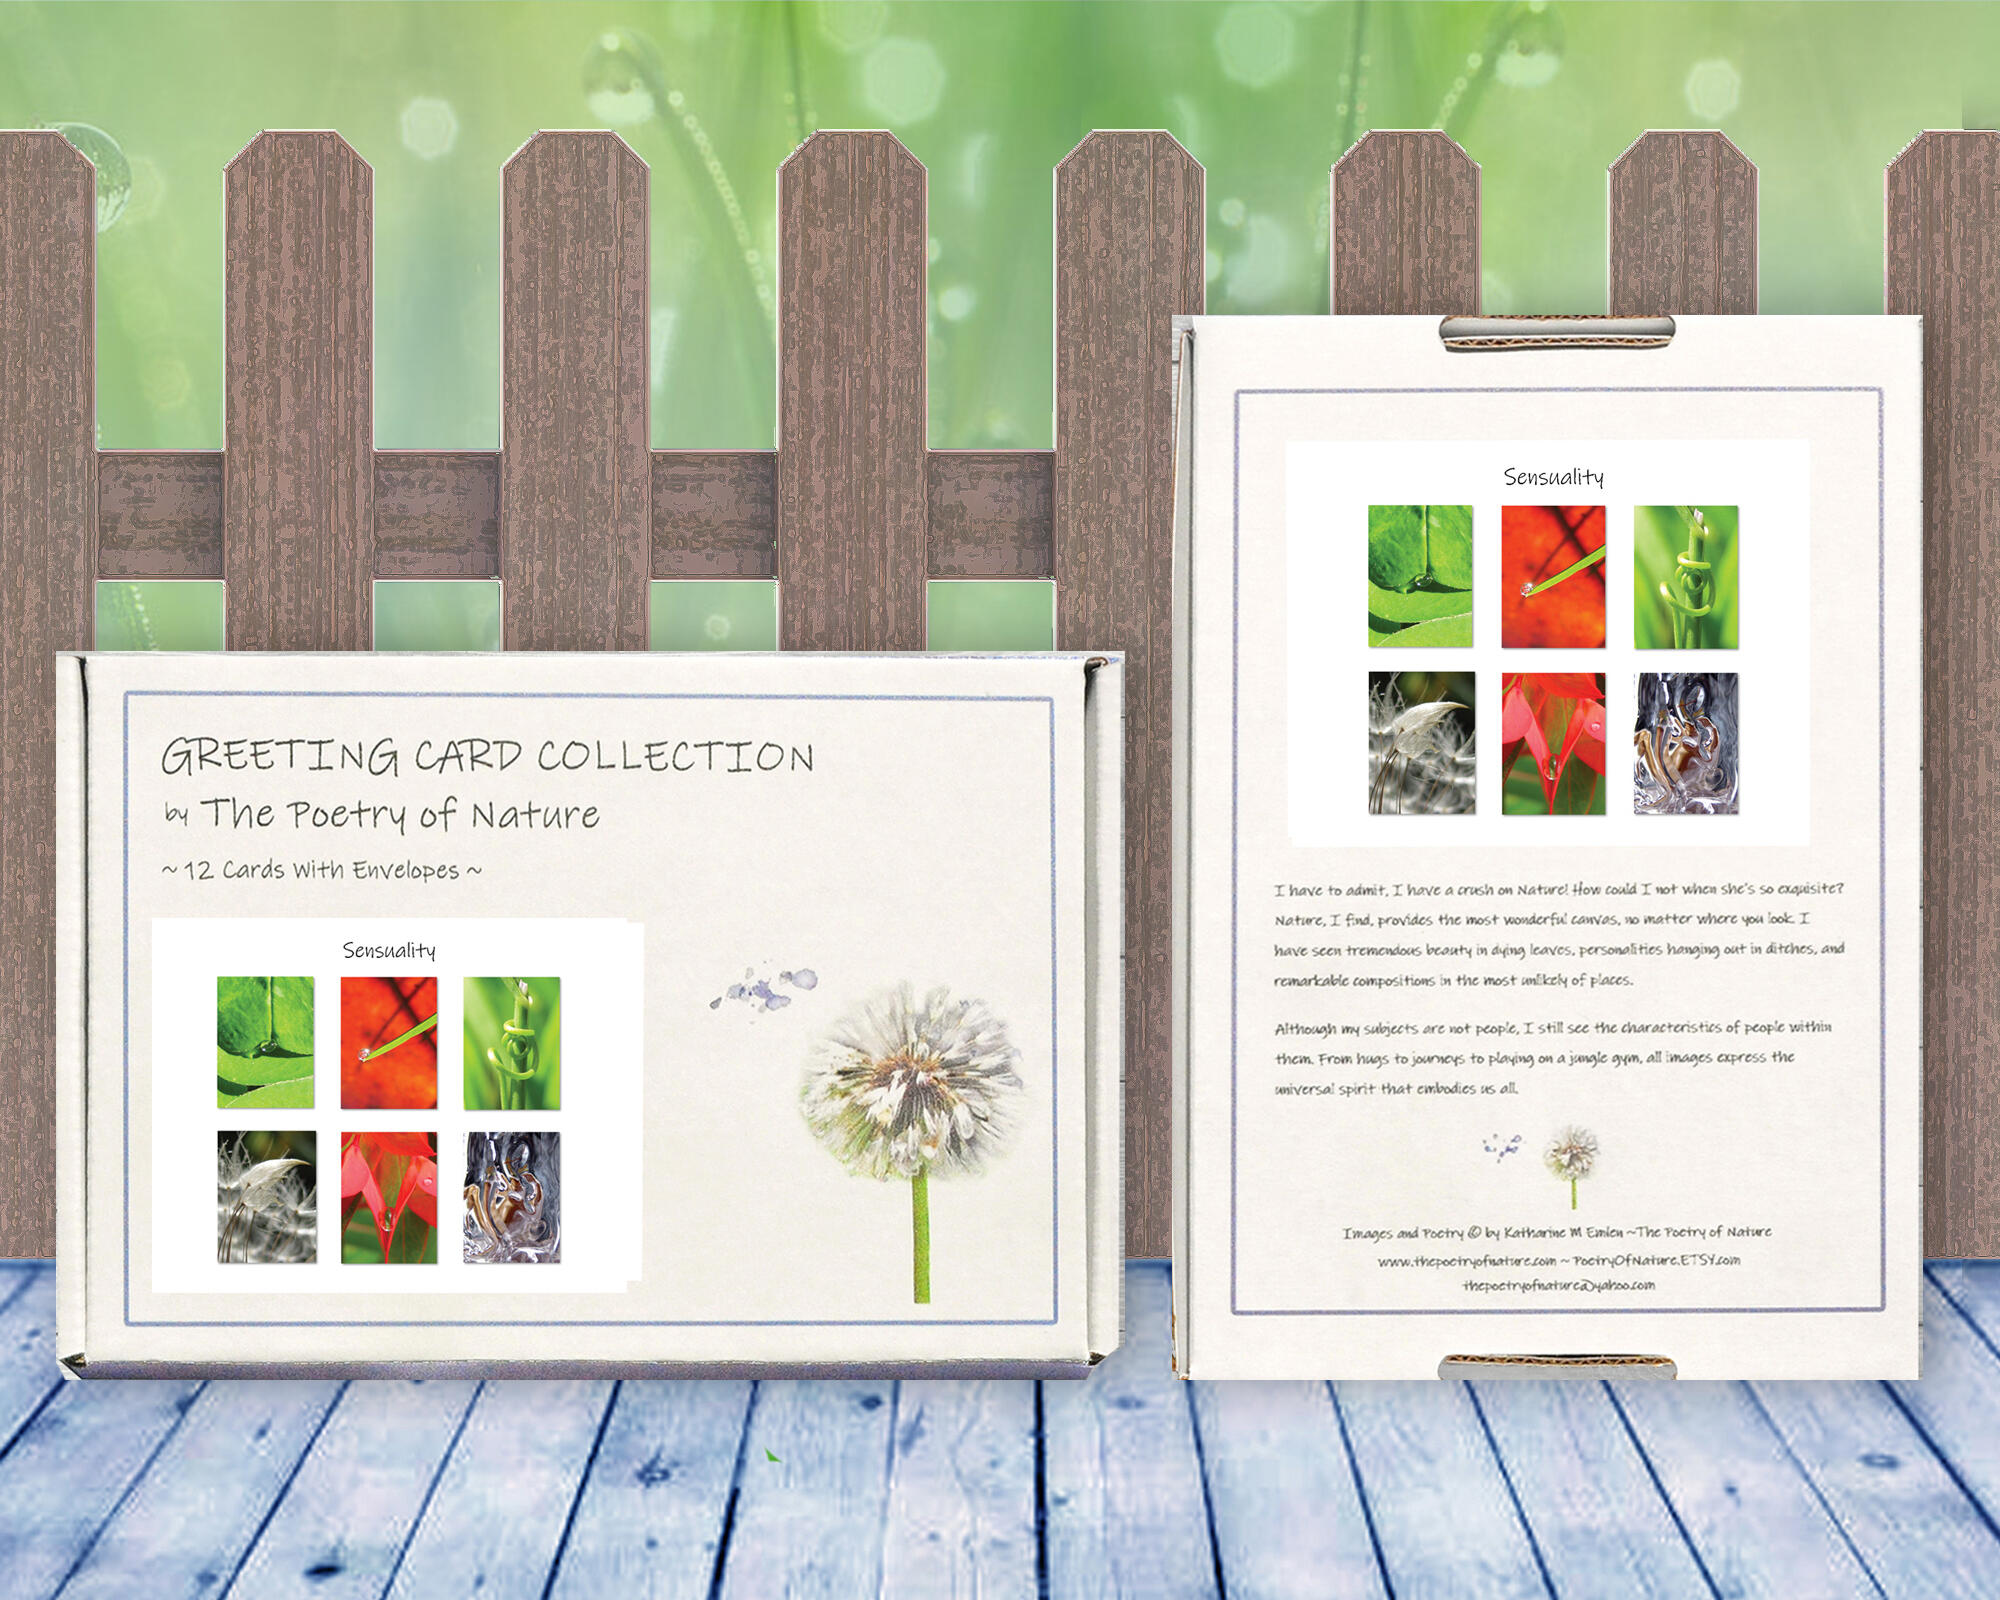 Sensuality - Greeting Card Collection by The Poetry of Nature